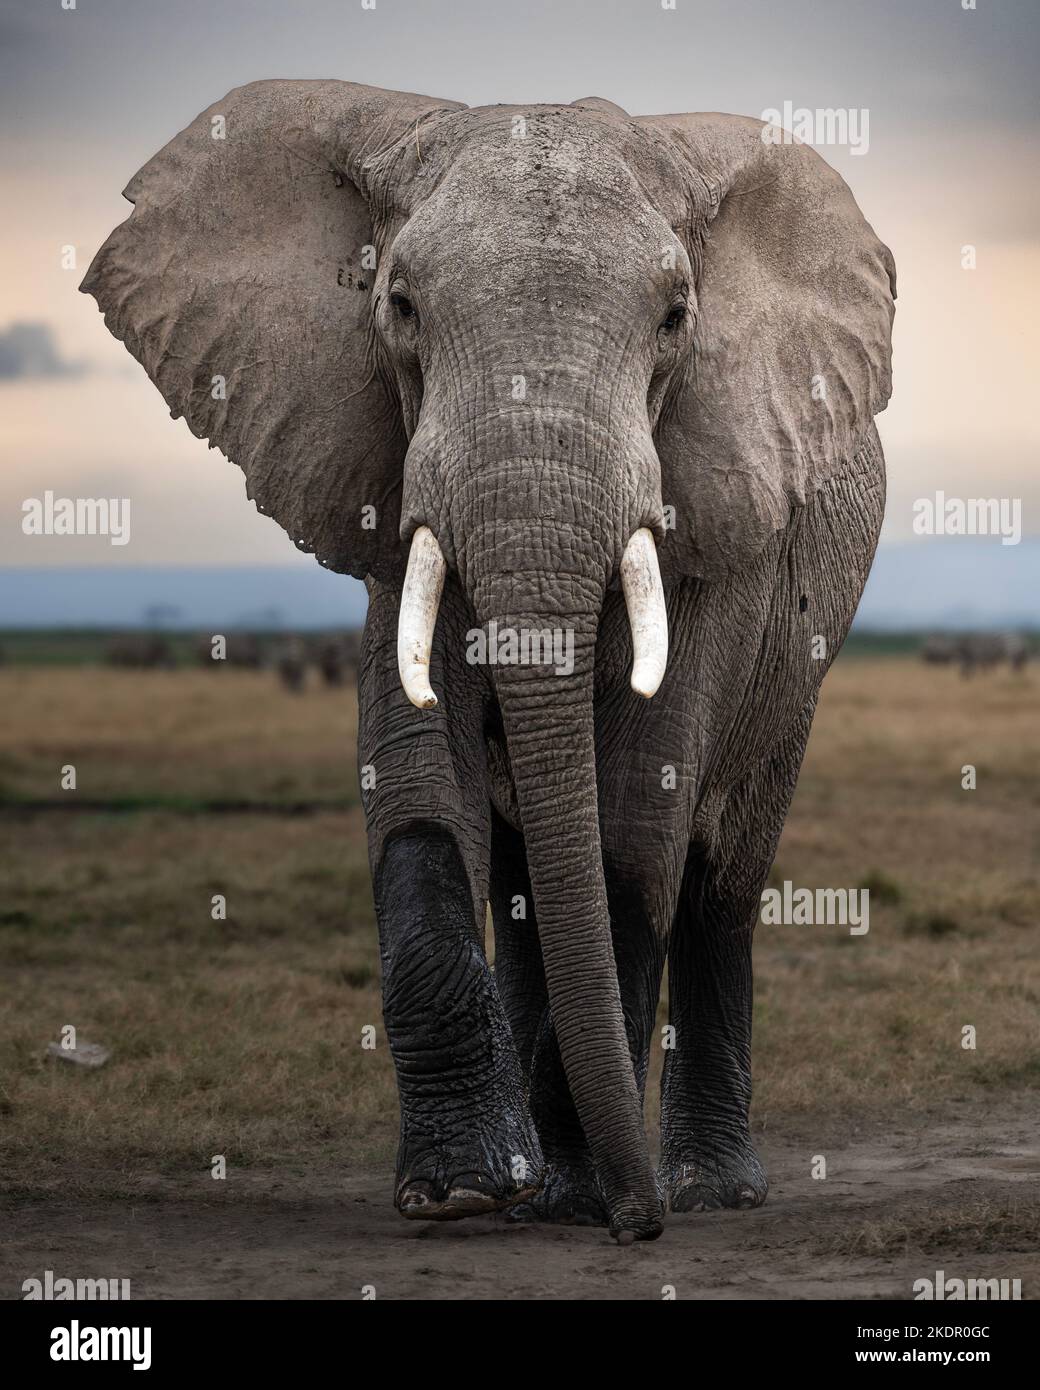 The elephant preparing to enter the fight. Kenya: THESE INCREDIBLE images show two elephants locked together in battle by twisting their trunks around Stock Photo